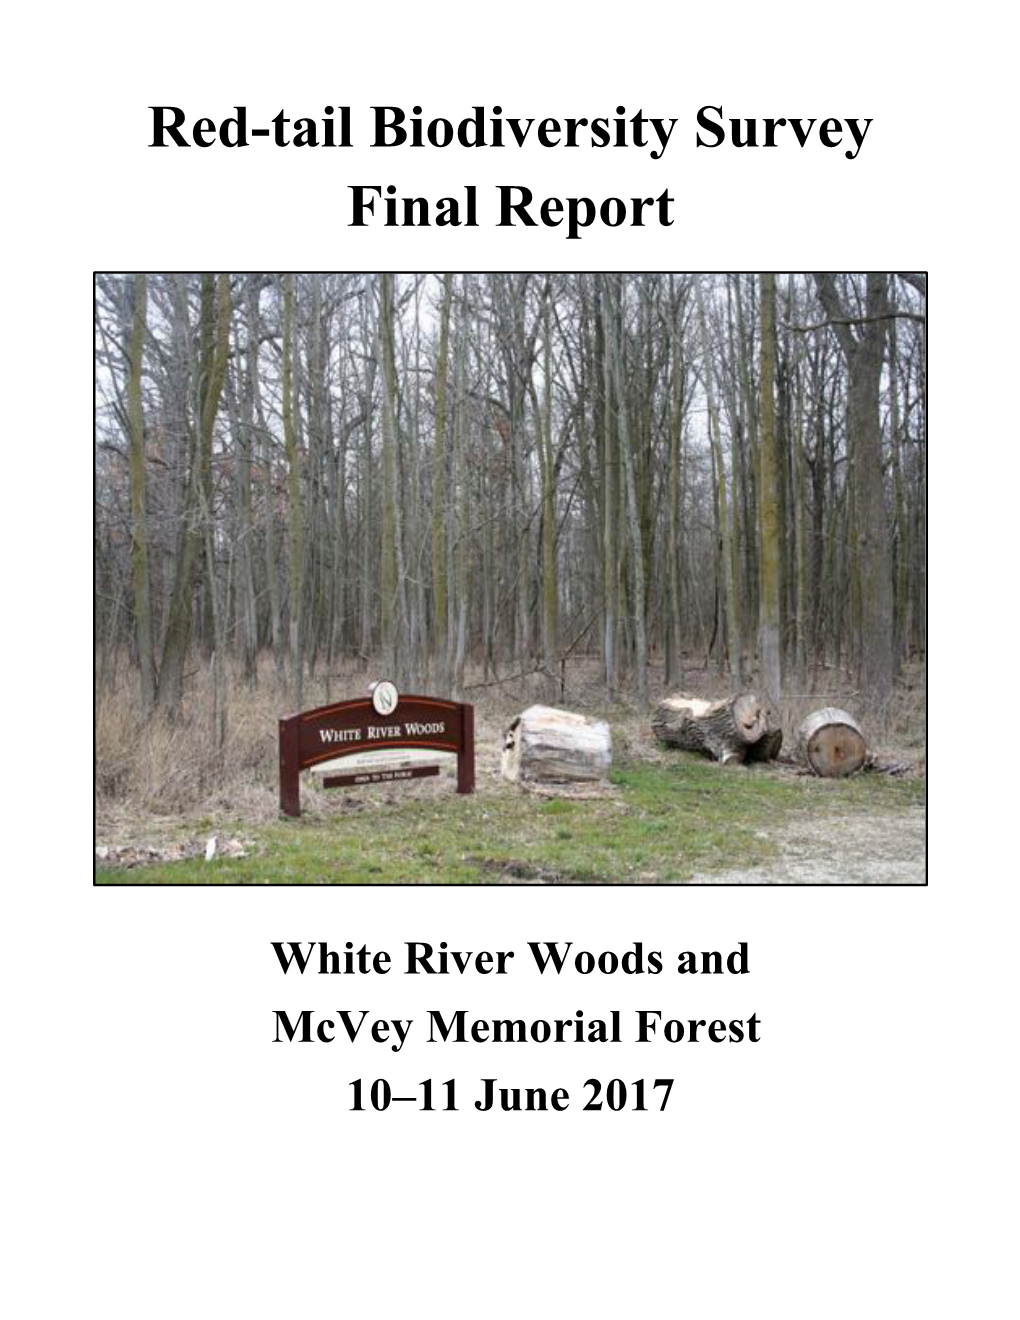 Red-Tail Biodiversity Survey Final Report